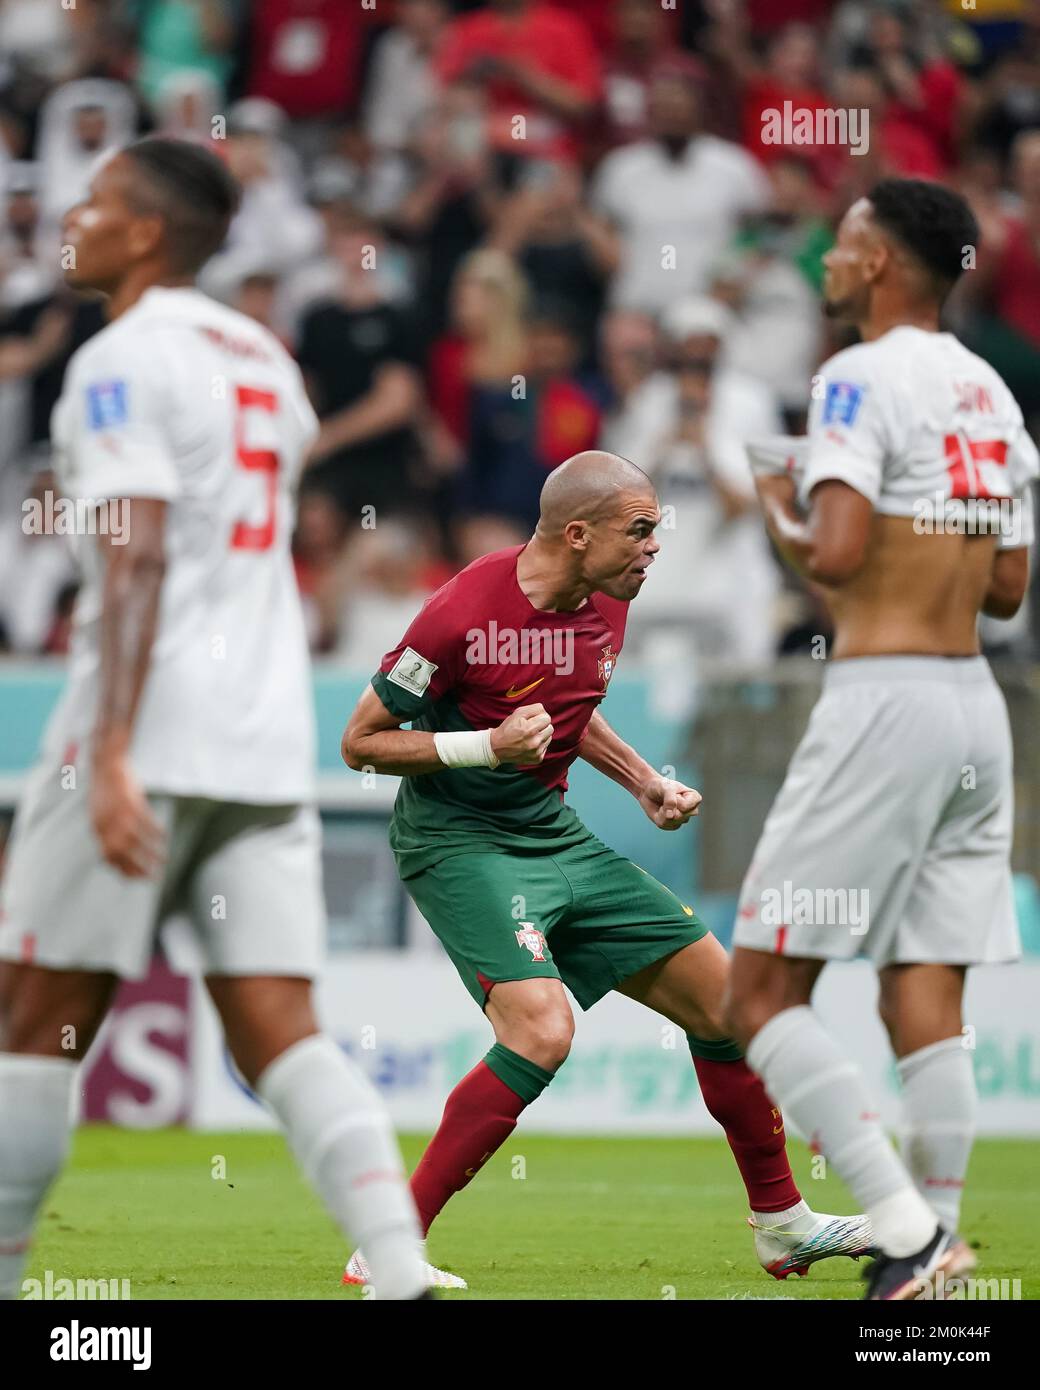 LUSAIL, QATAR - DECEMBER 6: Player of Portugal Pepe celebrates after scoring a goal during the FIFA World Cup Qatar 2022 Round of 16 match between Portugal and Switzerland at Lusail Stadium on December 6, 2022 in Lusail, Qatar. (Photo by Florencia Tan Jun/PxImages) Stock Photo